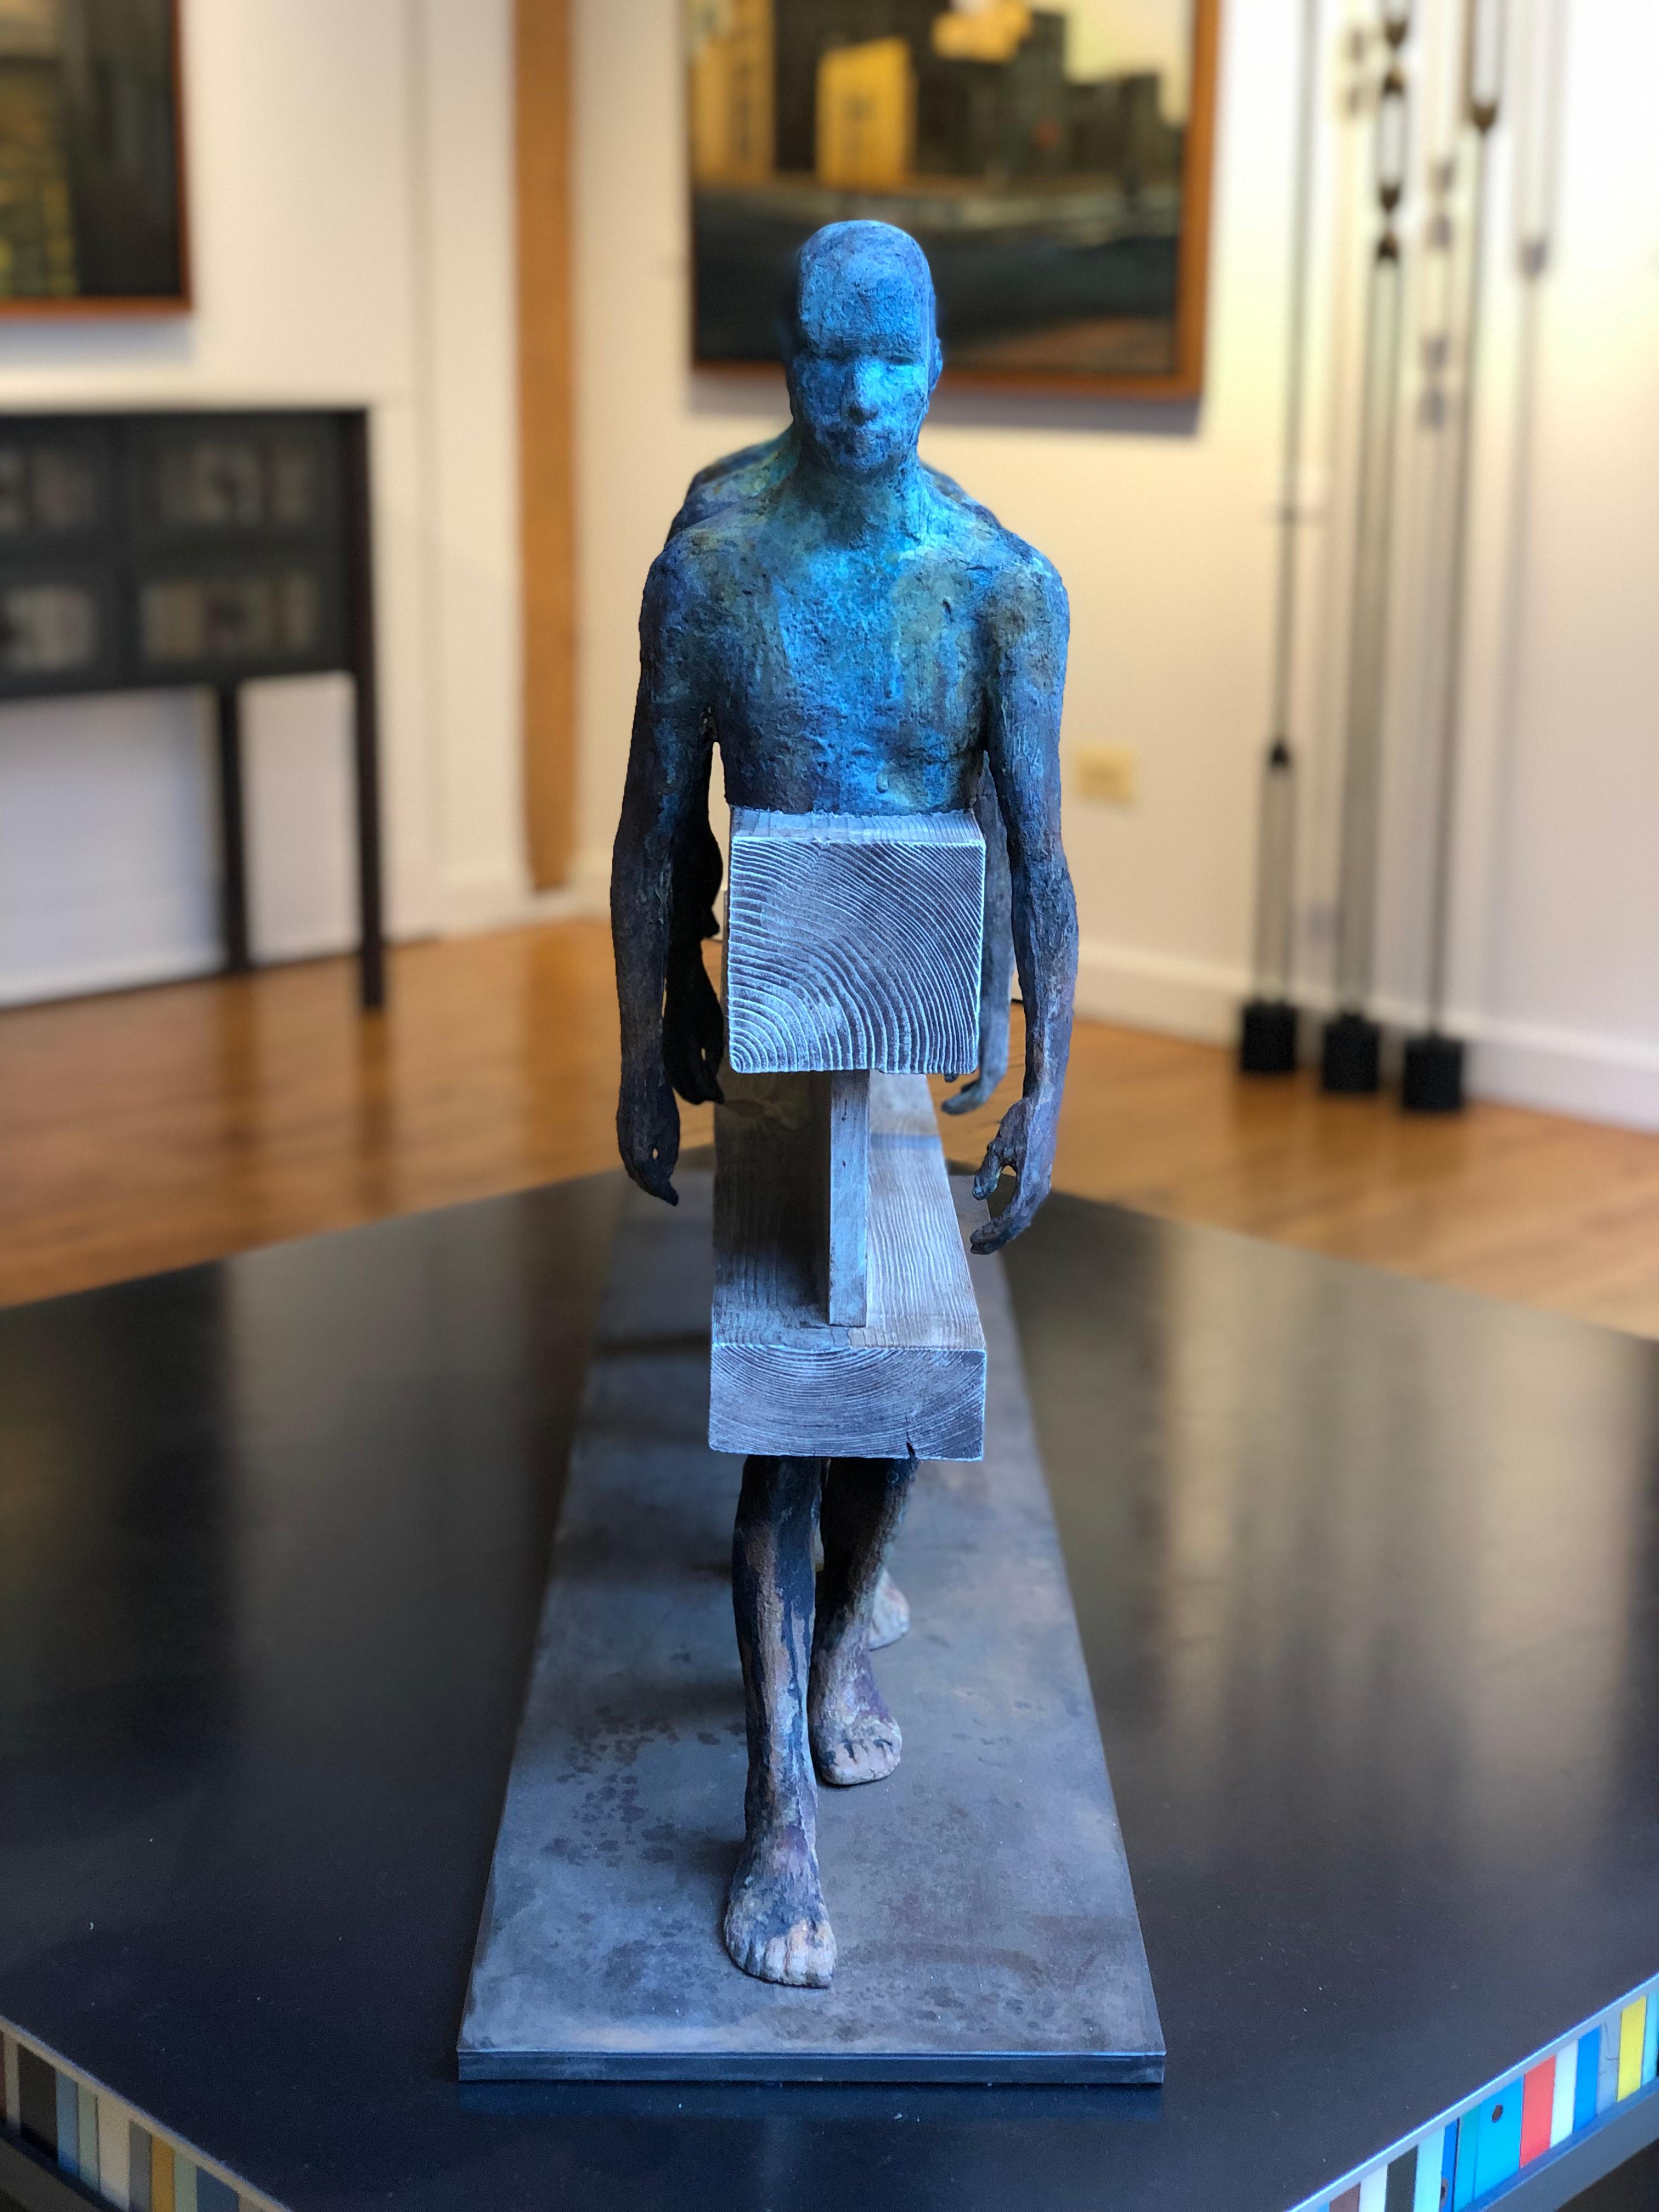 Three figures walk in tandem in this bronze, steel and wood sculpture.  Their bodies are connected and abstracted by a steel and wood beam.  The figures are patinead in green verdigris and brown rust.  The wood and steel beam is finished in a